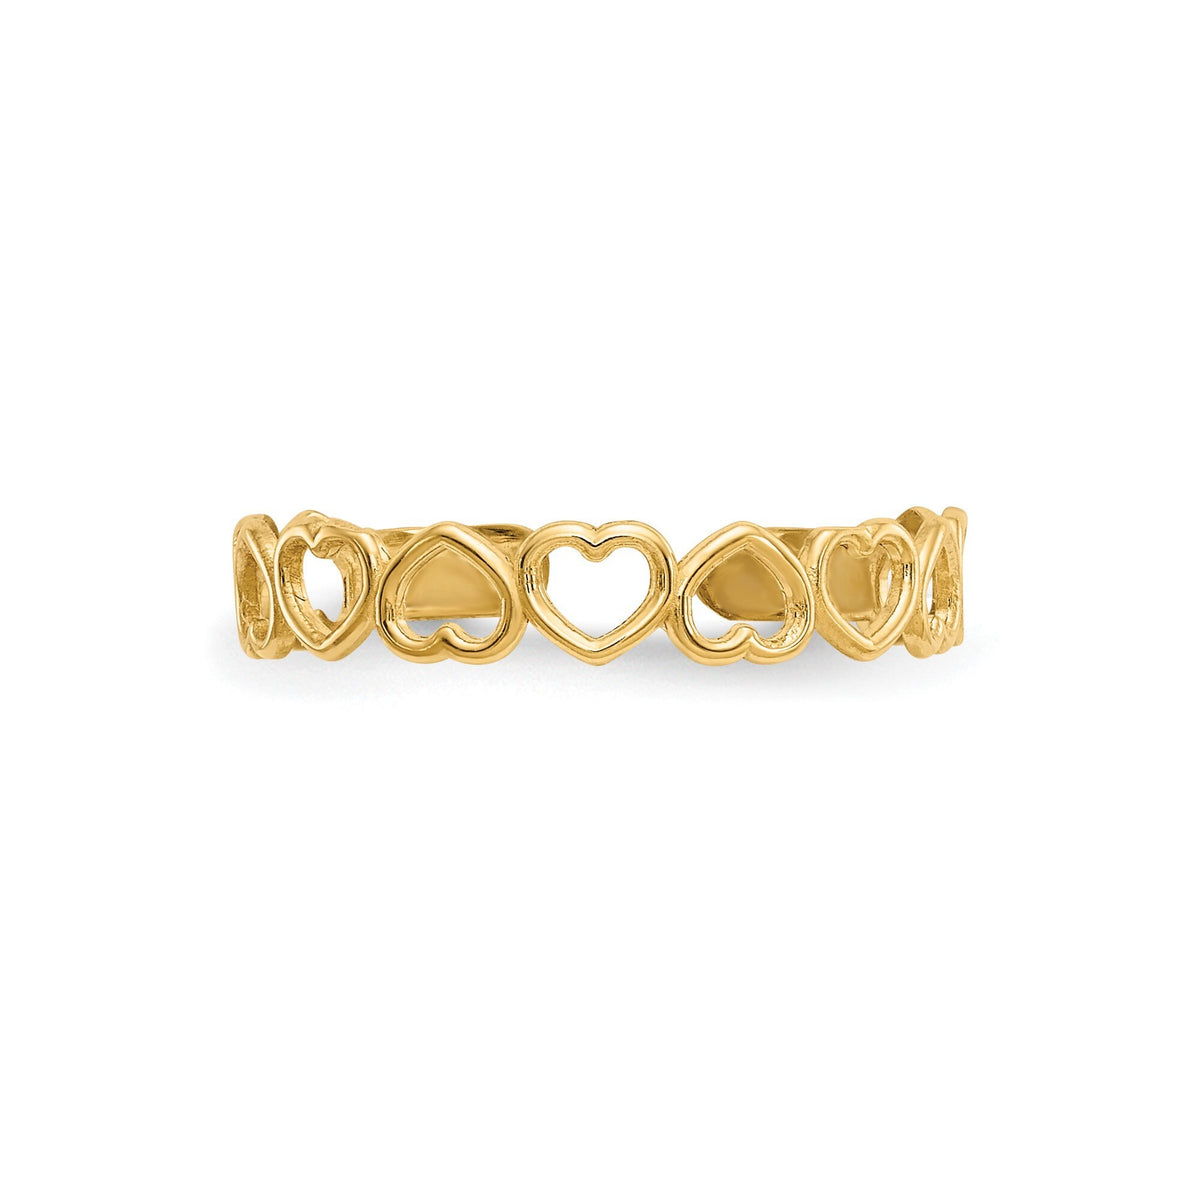 14k Yellow Gold Open Hearts Dainty Toe Ring 4mm Band- Gift Box Included (Very Thin & Dainty Toe Ring)